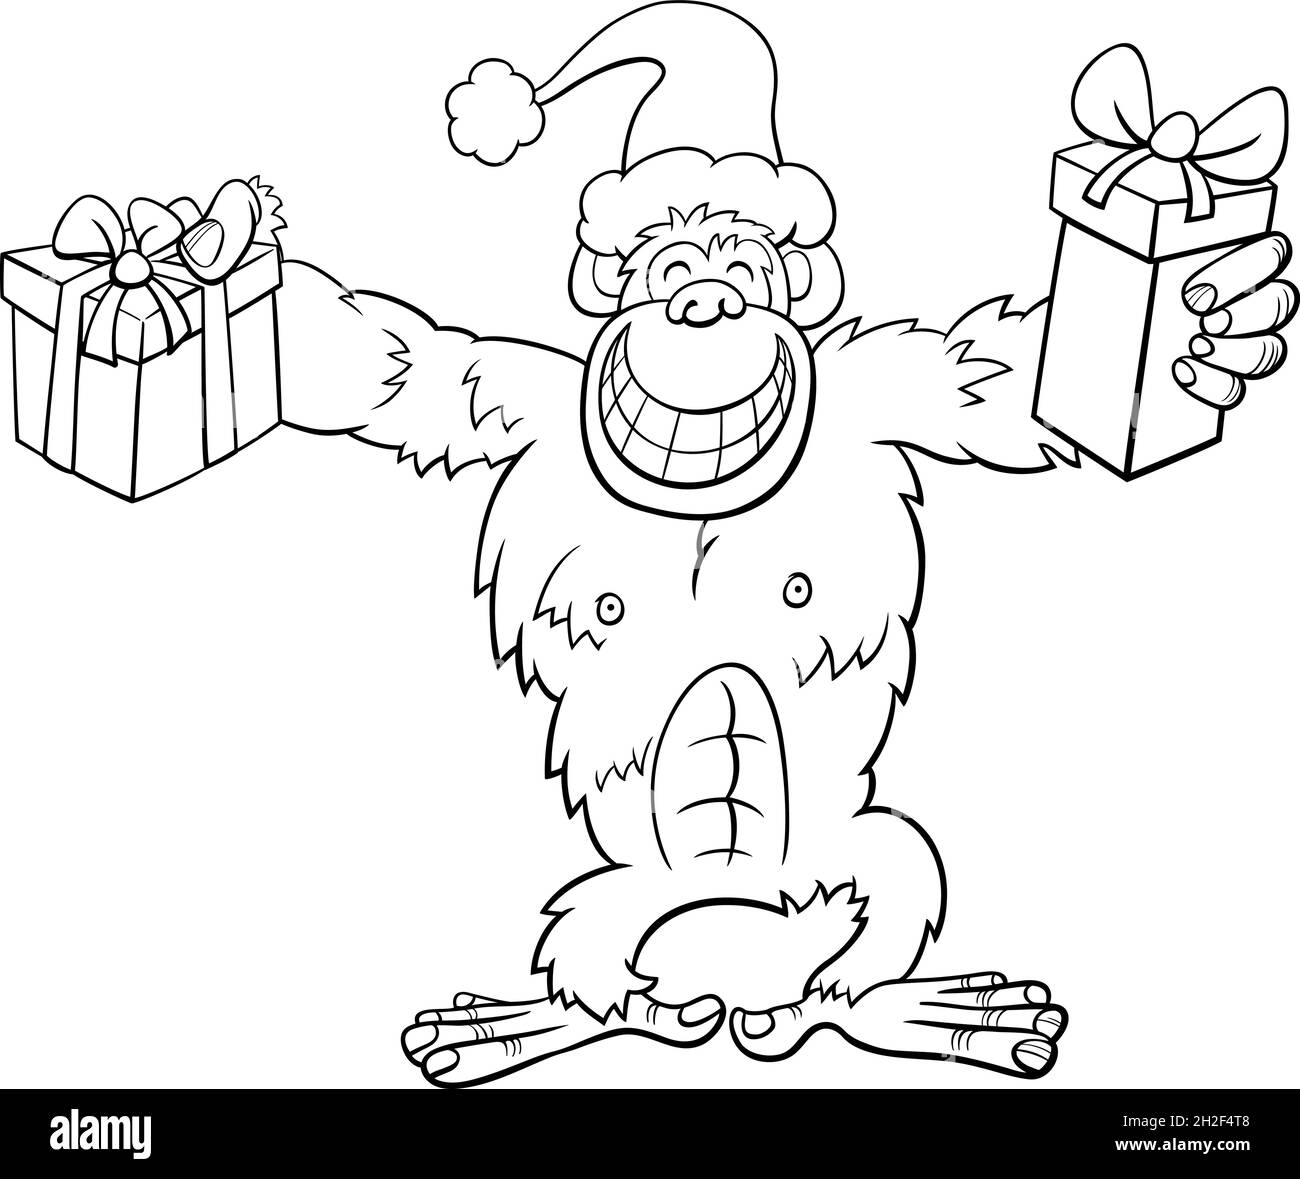 Black and white cartoon illustration of chimpanzee animal character with present on Christmas time coloring book page Stock Vector